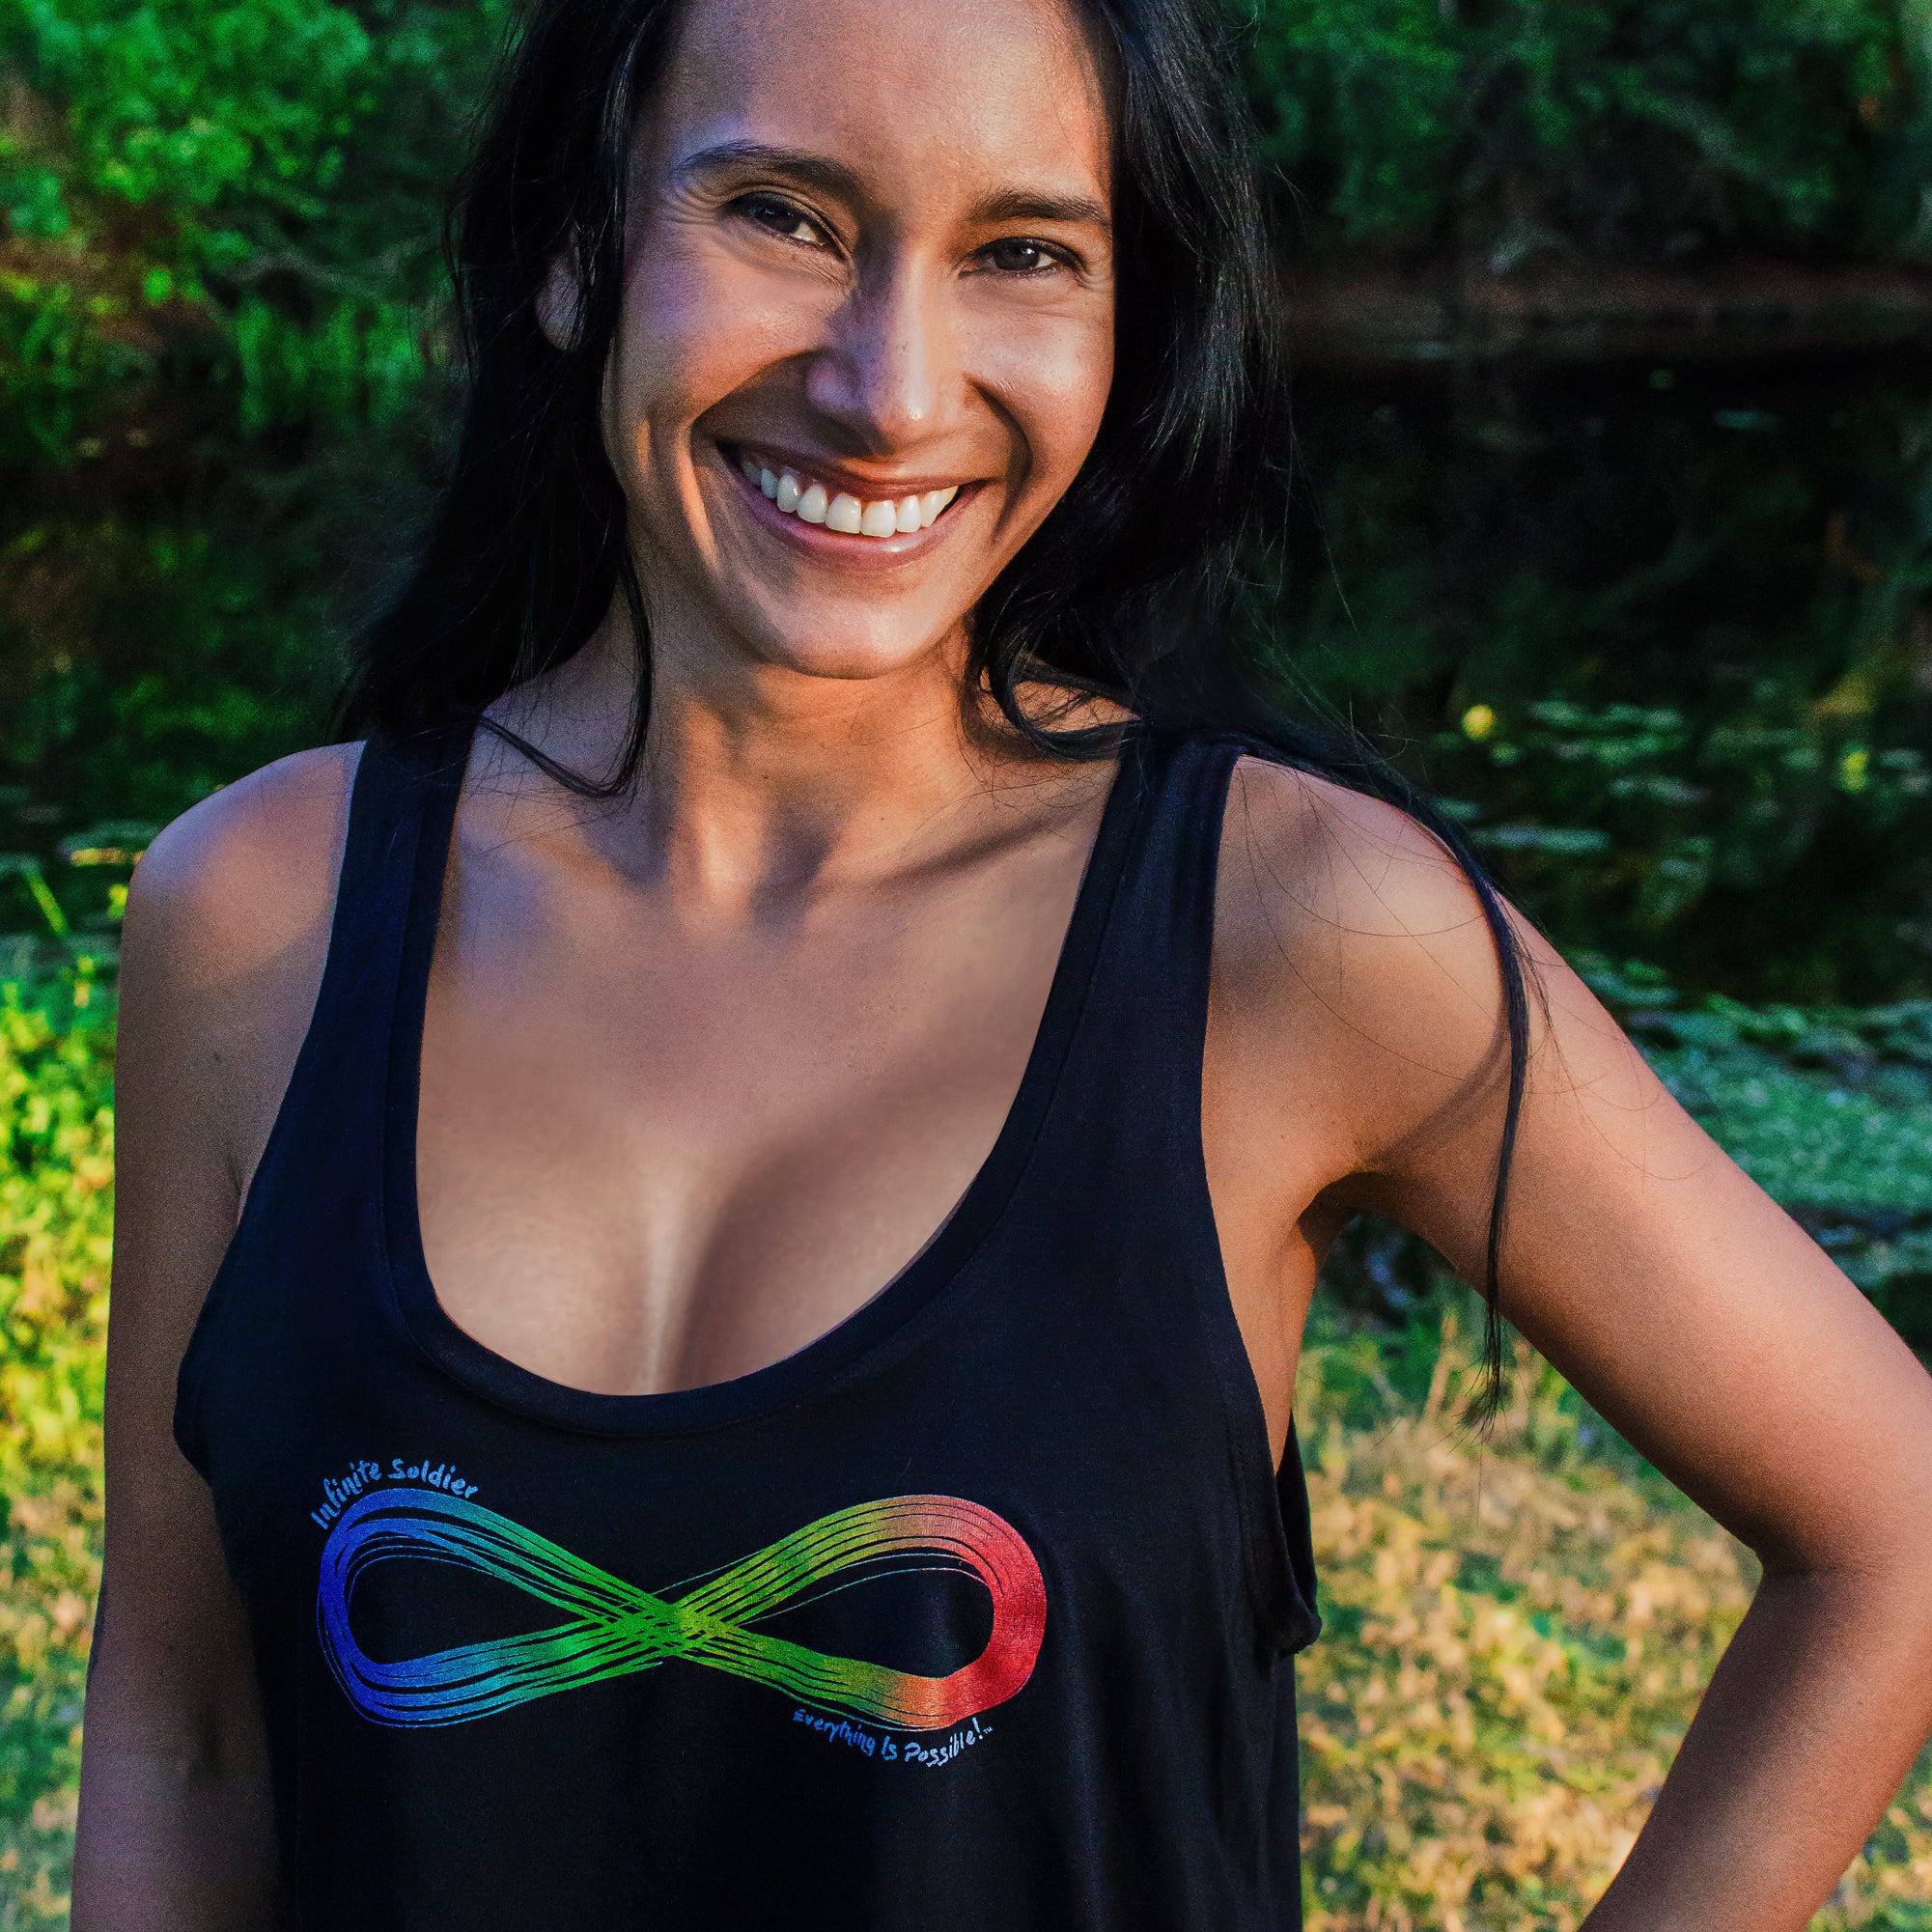 Check Out Our Infinite Pride Collection – Help Us Support LGBT Pride While Spreading Love and Acceptance!